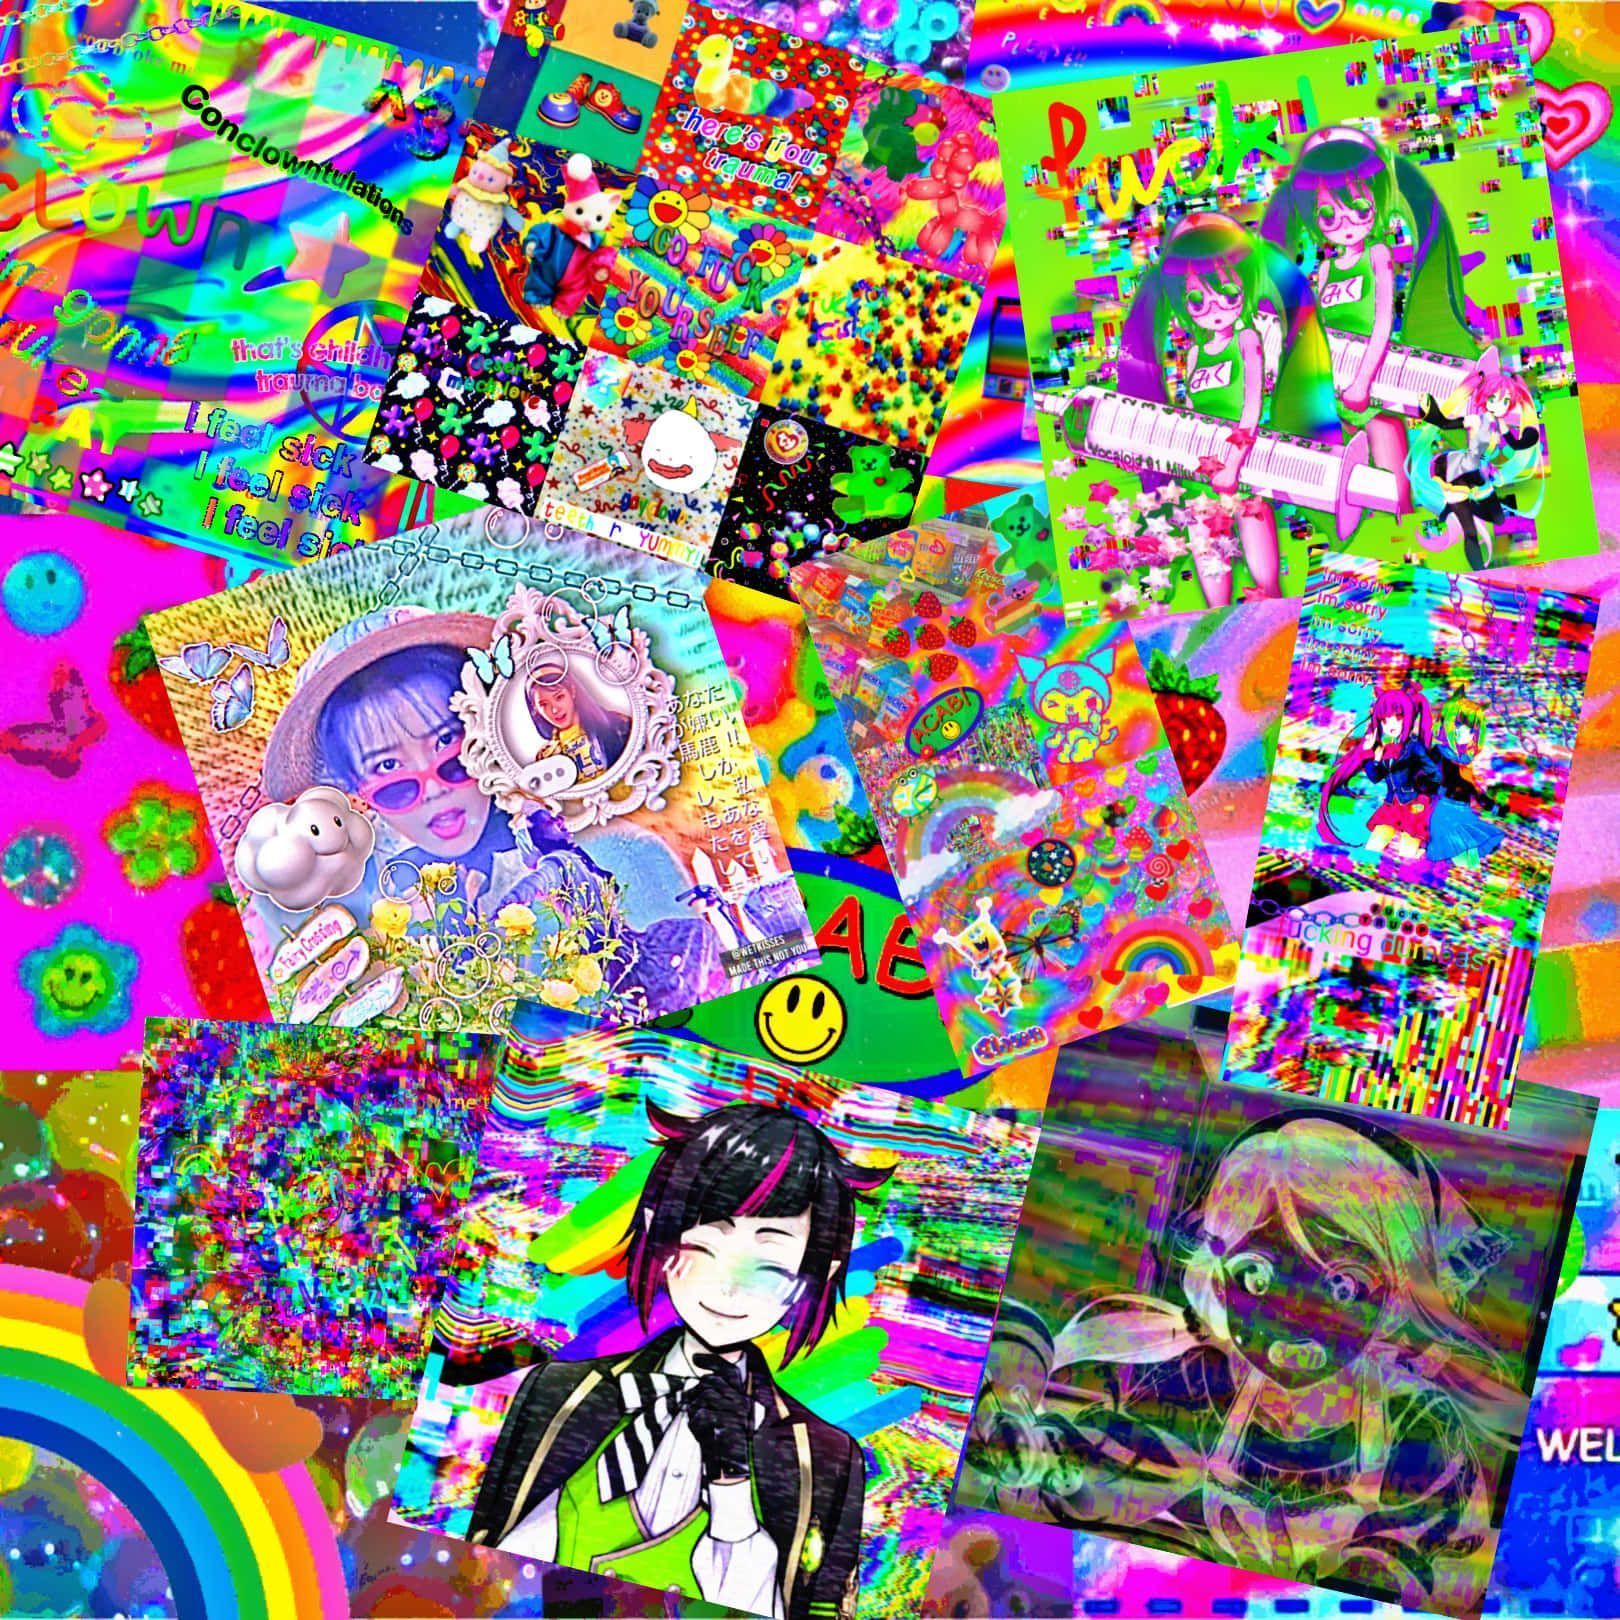 A collage of different images, including a rainbow, a smiley face, and a person with black hair and purple makeup. - Scenecore